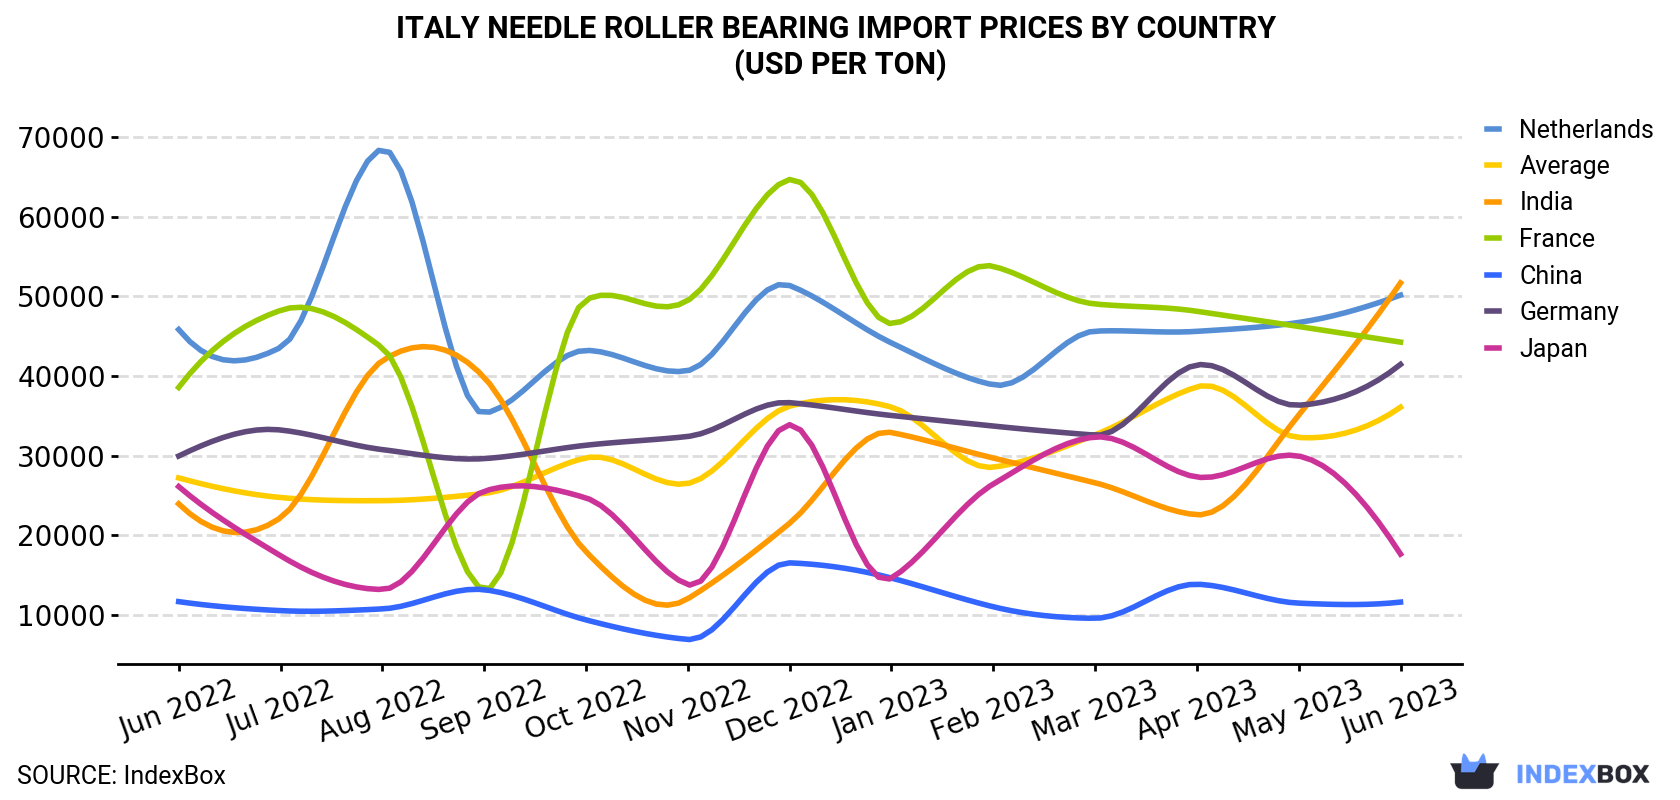 Italy Needle Roller Bearing Import Prices By Country (USD Per Ton)